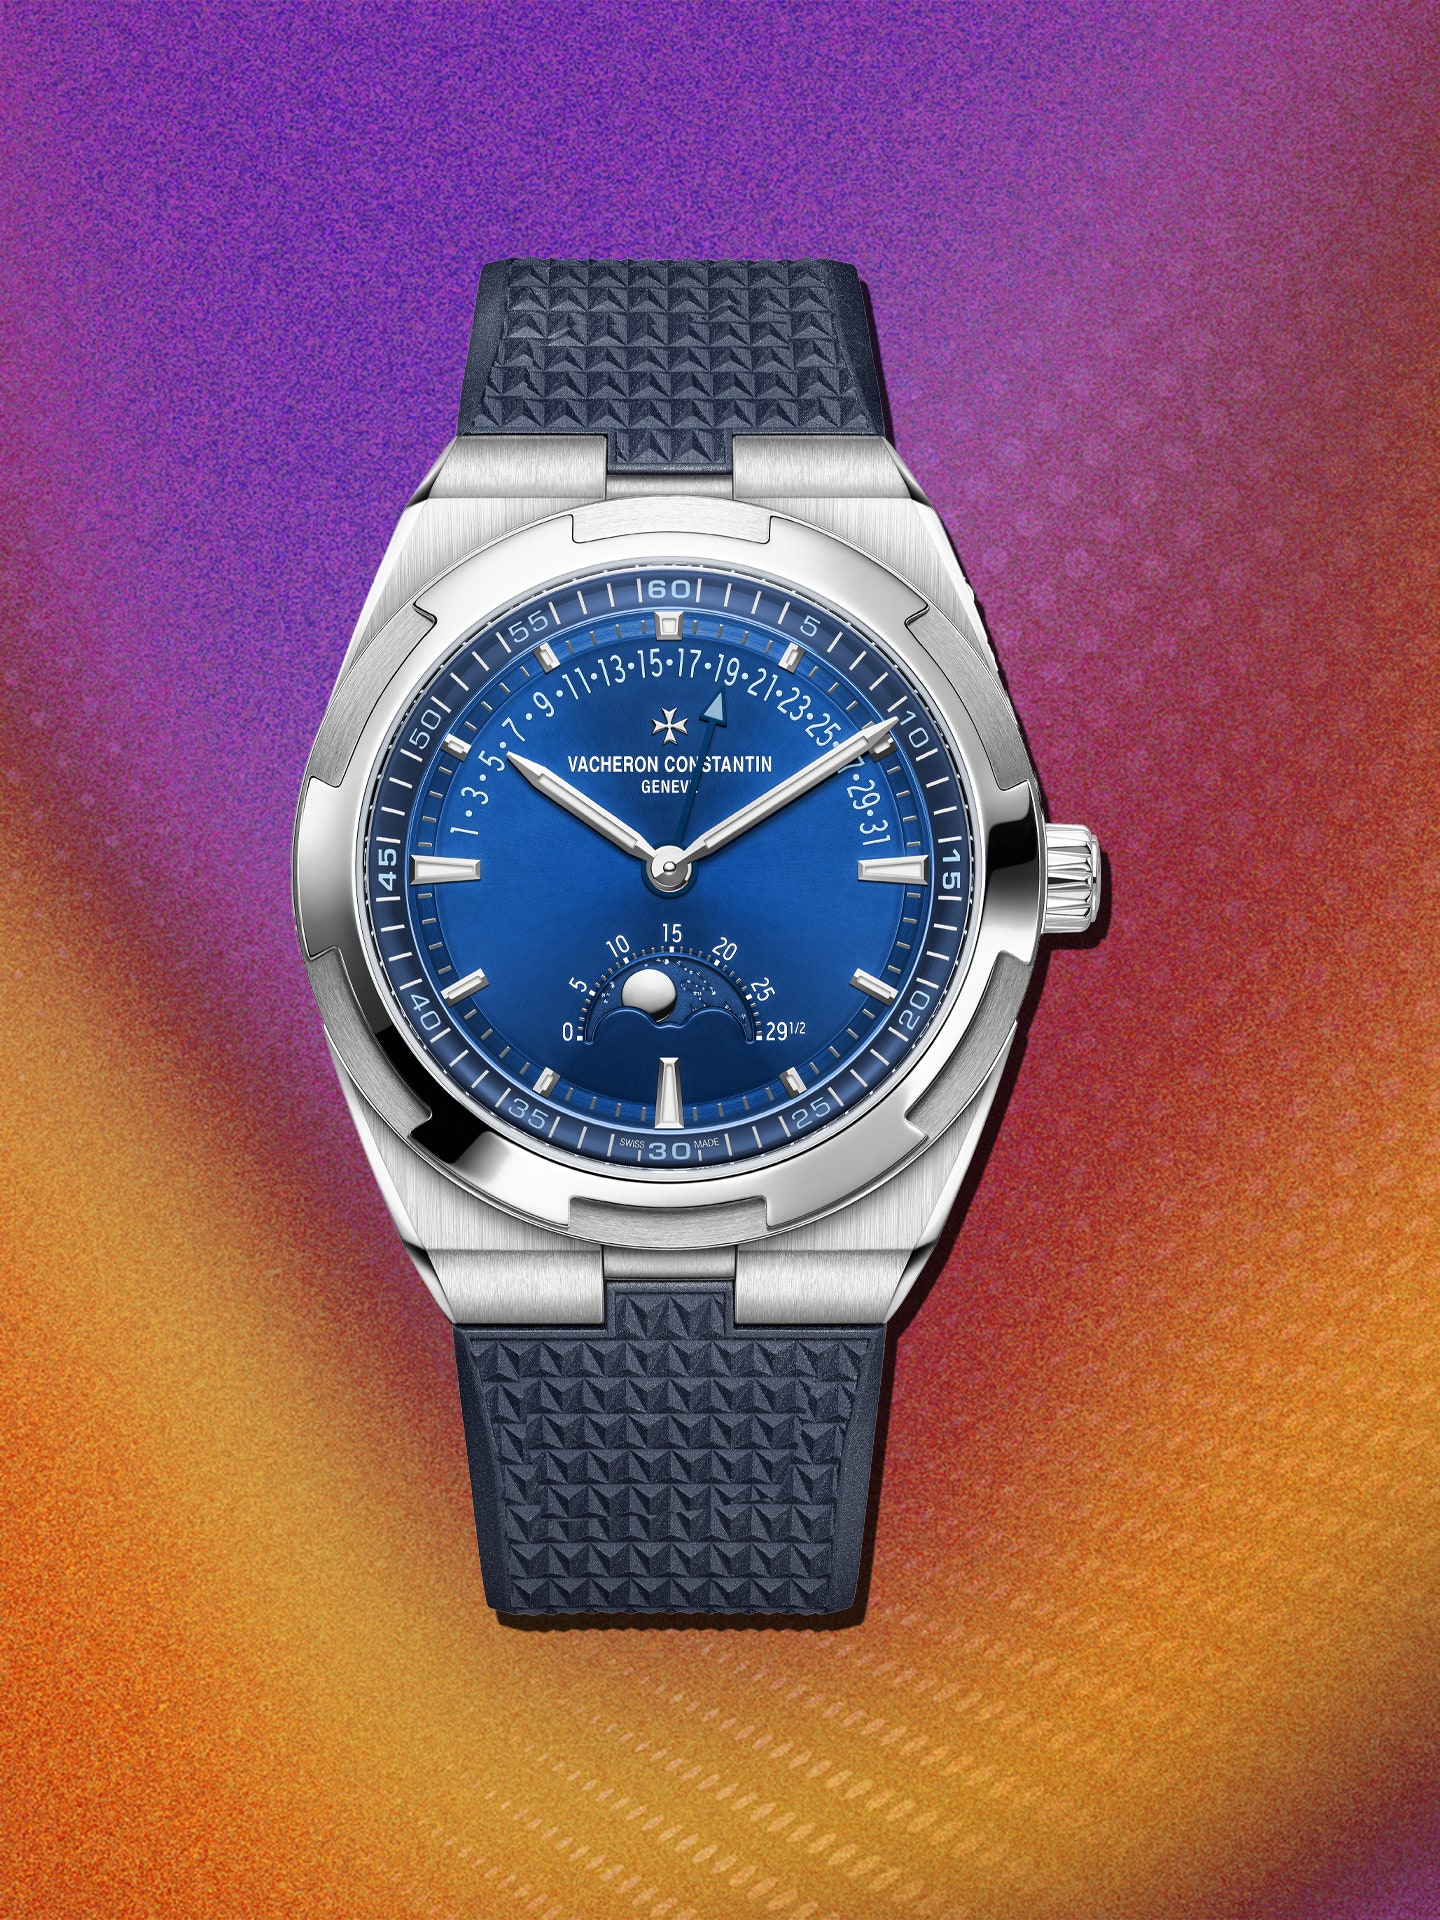 18 killer new watches  according to the Watches and Wonders experts